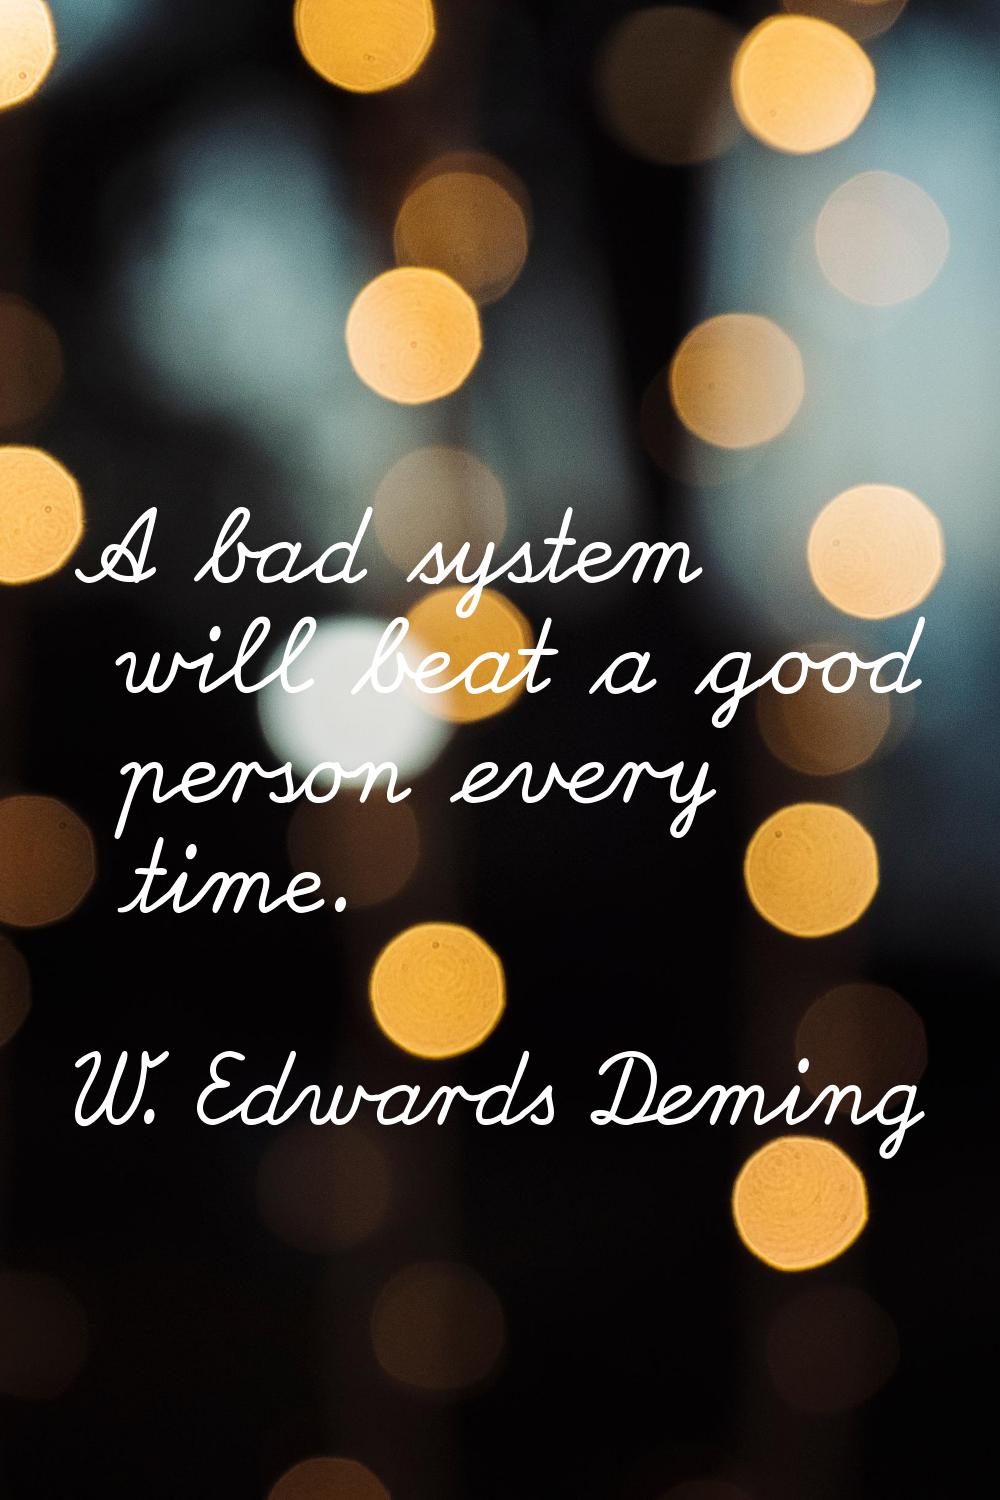 A bad system will beat a good person every time.